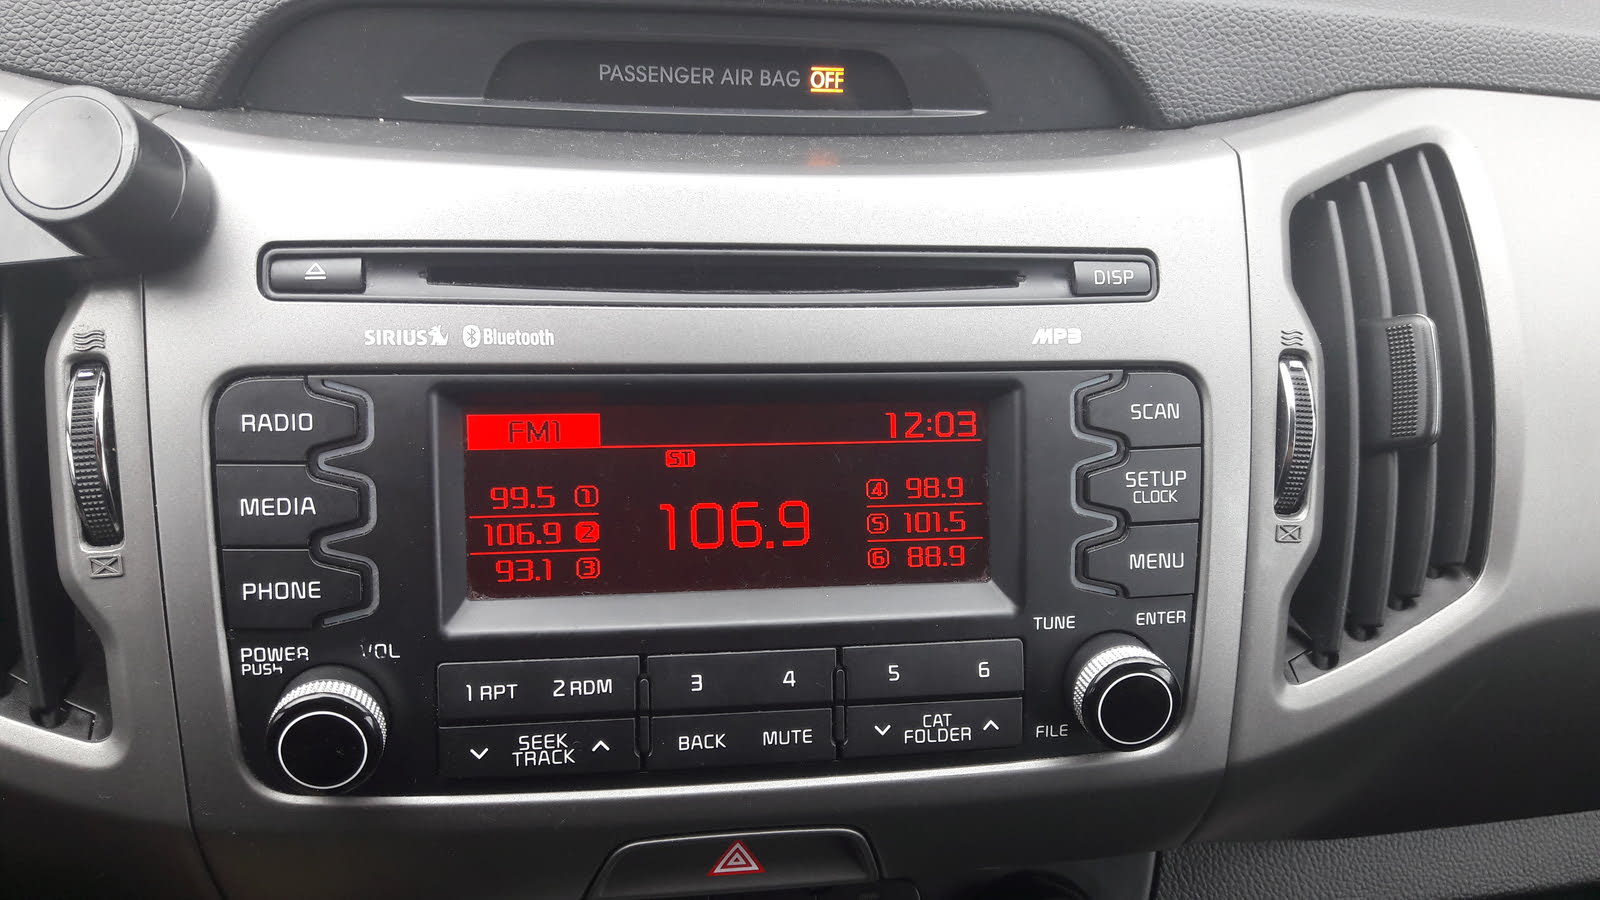 Kia Sportage Questions What to do if there is no sound